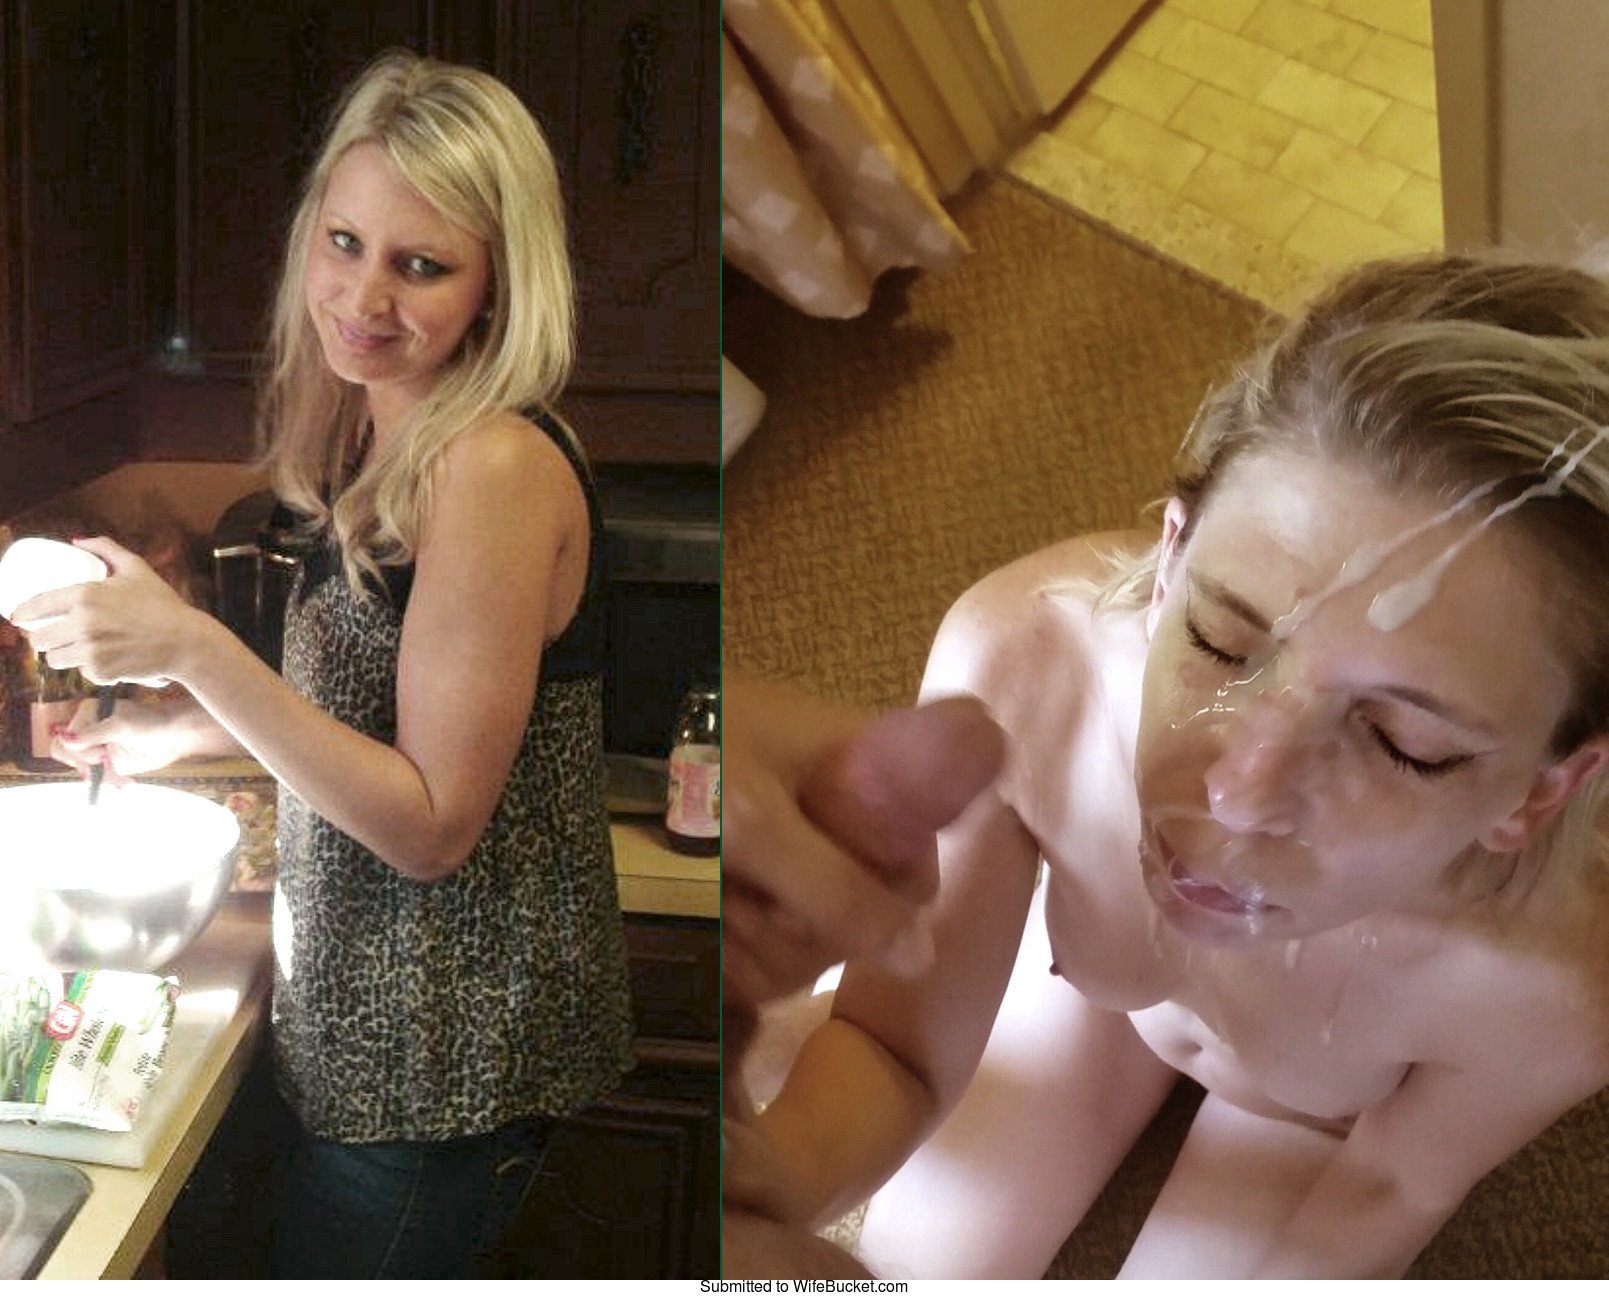 Before After Homemade Cumshots - before-after pics â€“ WifeBucket | Offical MILF Blog